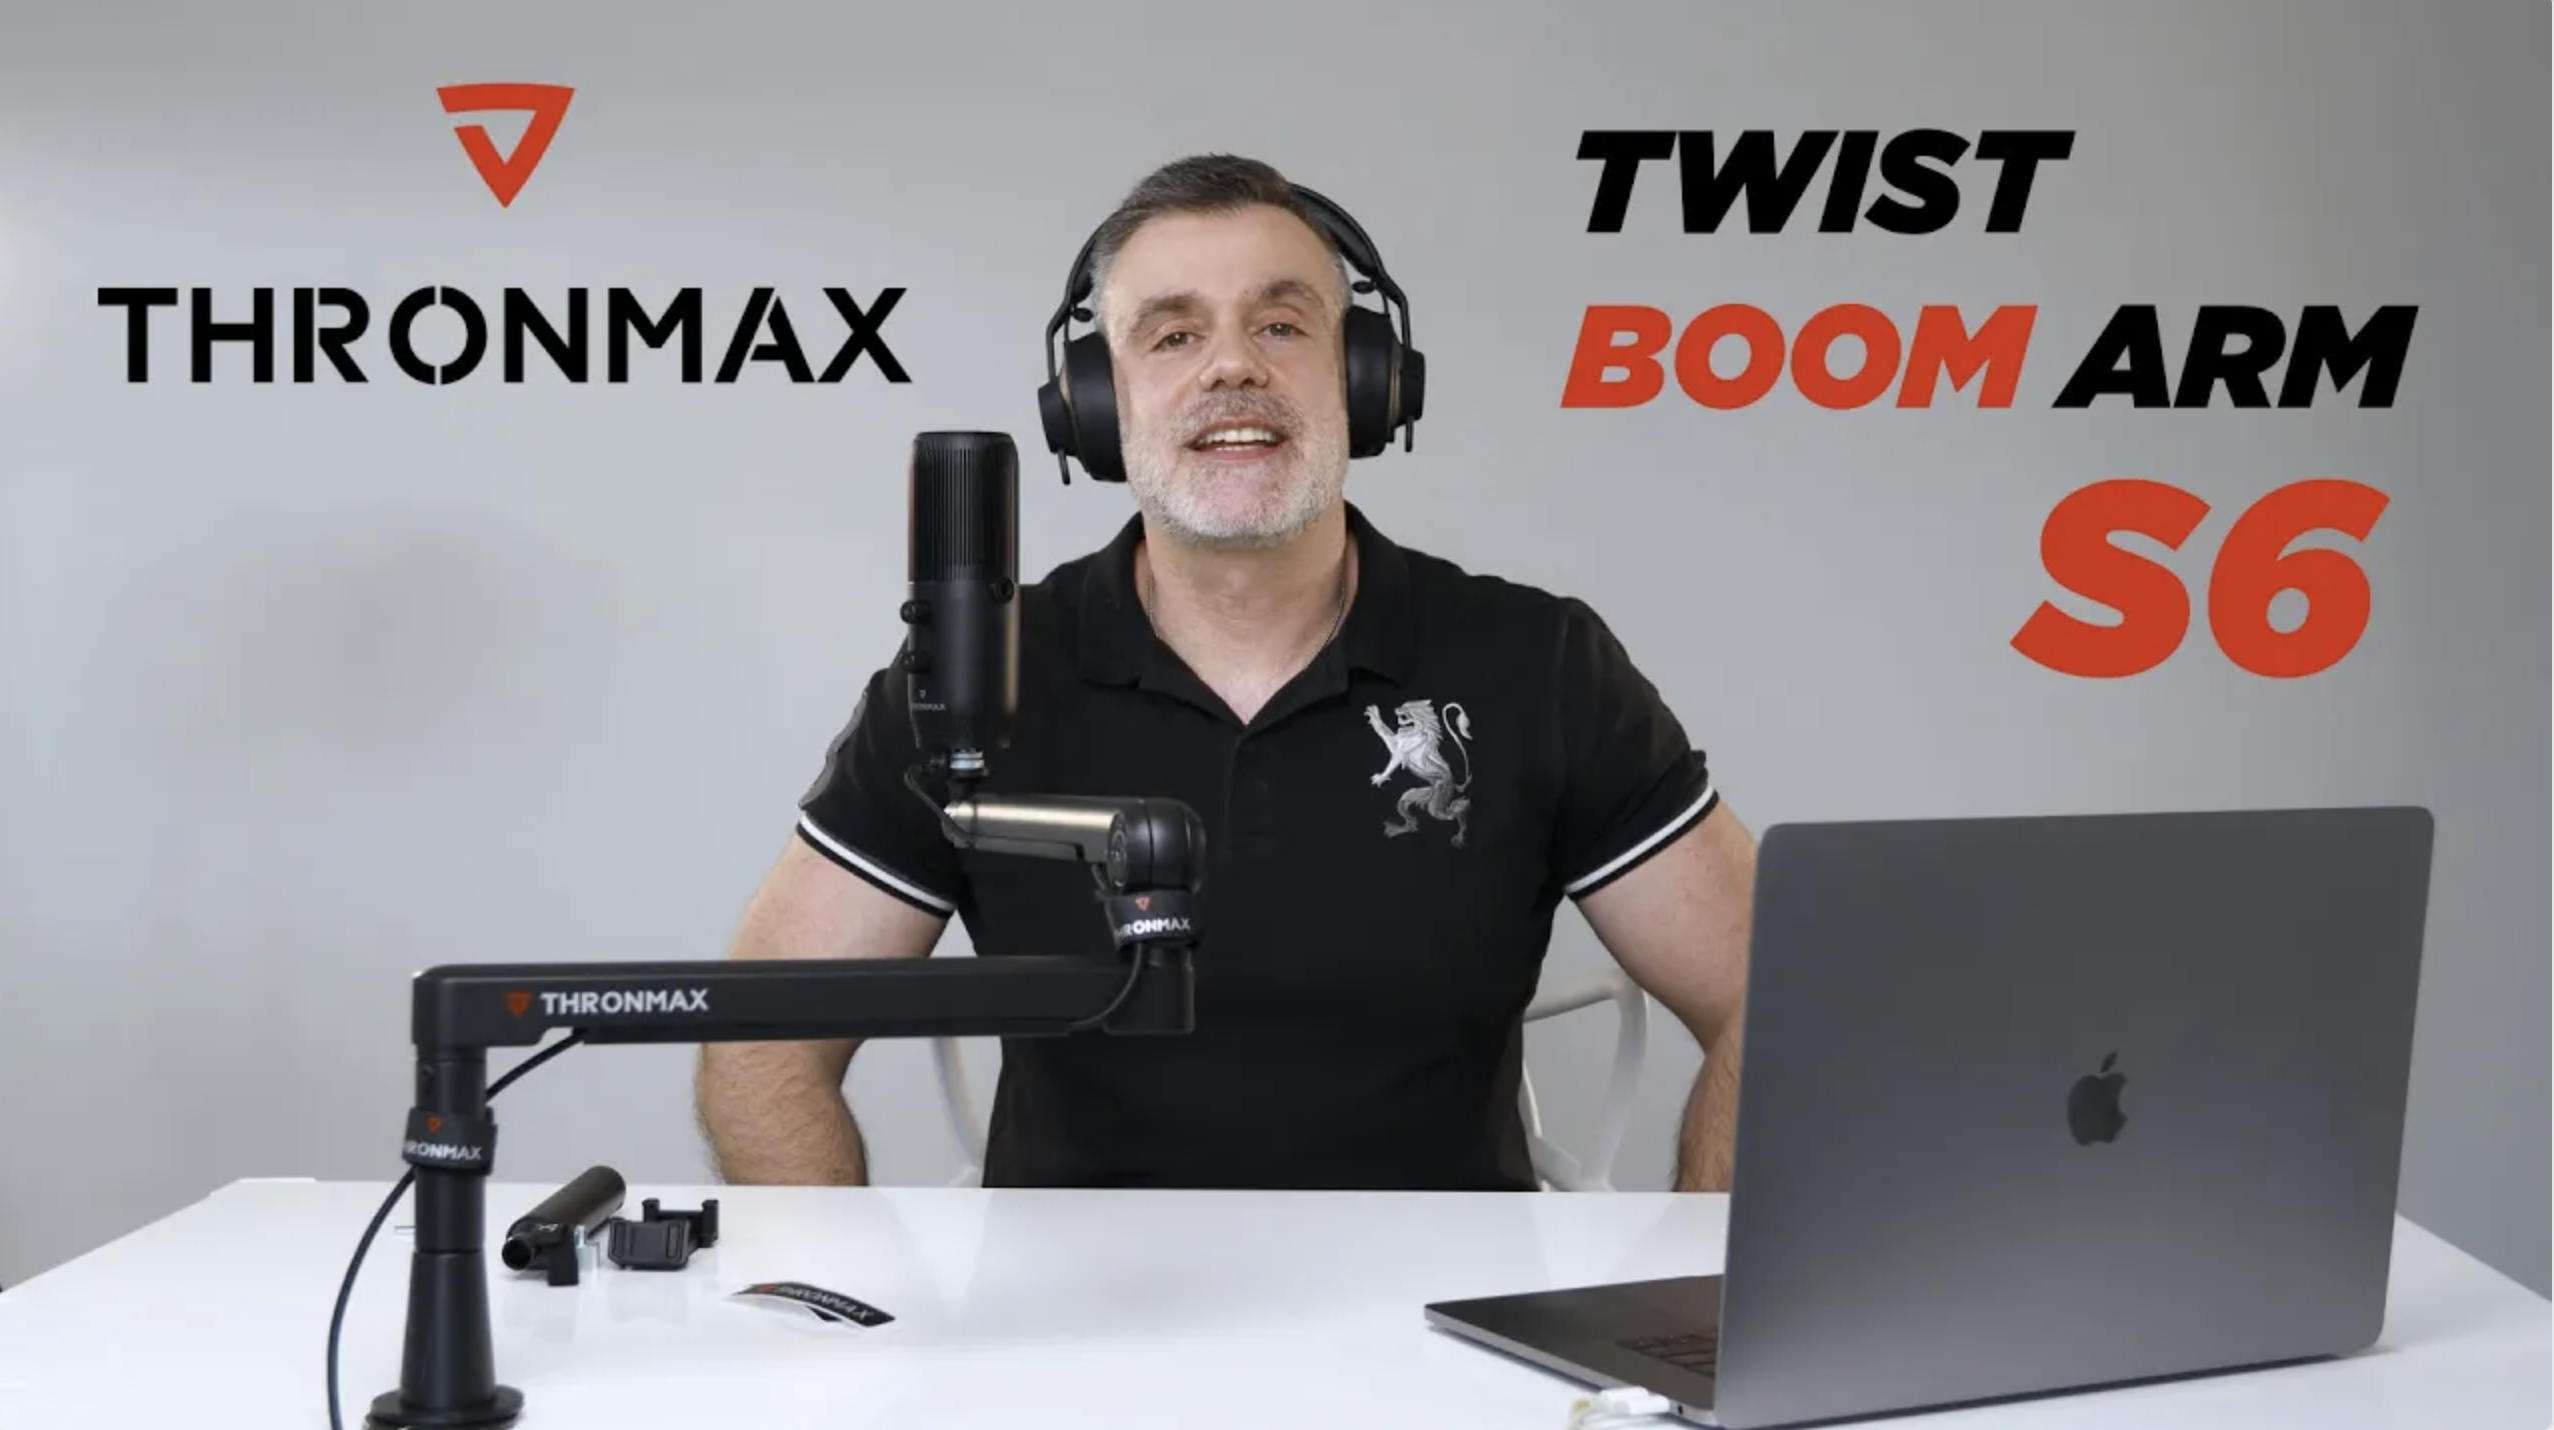 You are currently viewing Thronmax Twist Boom Arm